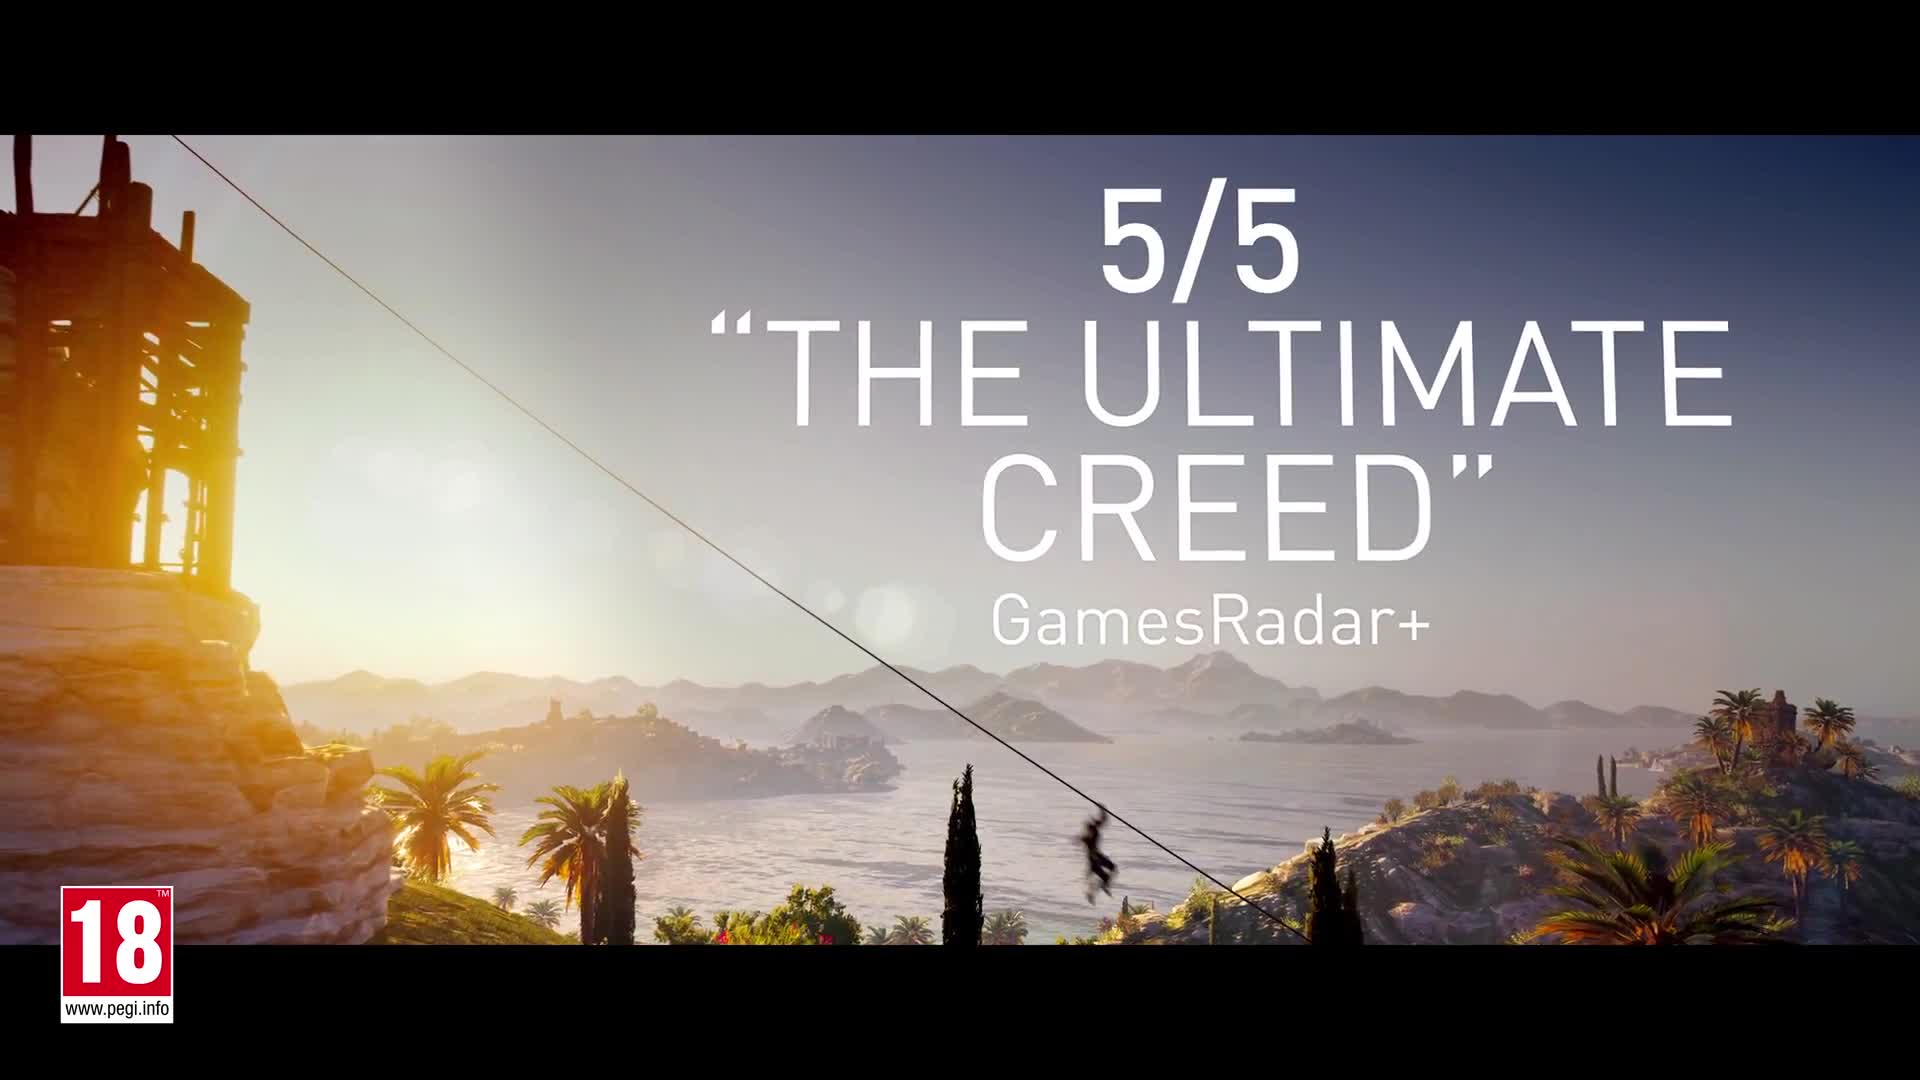 Assassin's Creed Odyssey - accolades trailer